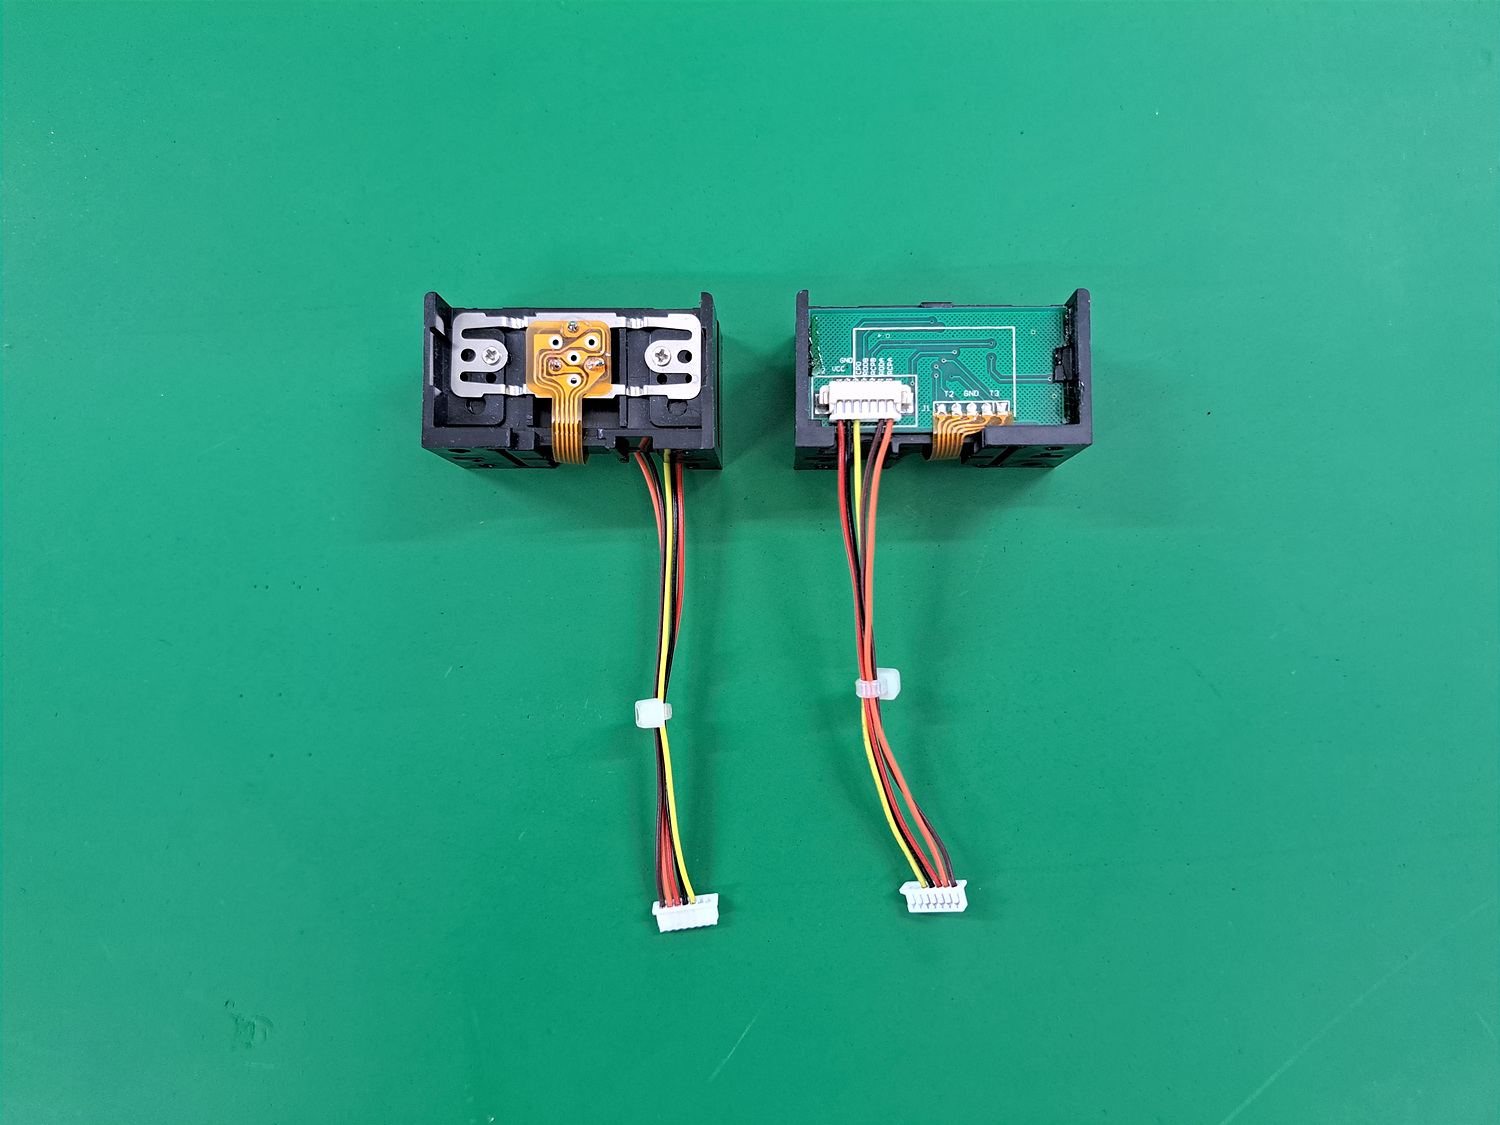 Card Reader with PCB (JSR1120-8)